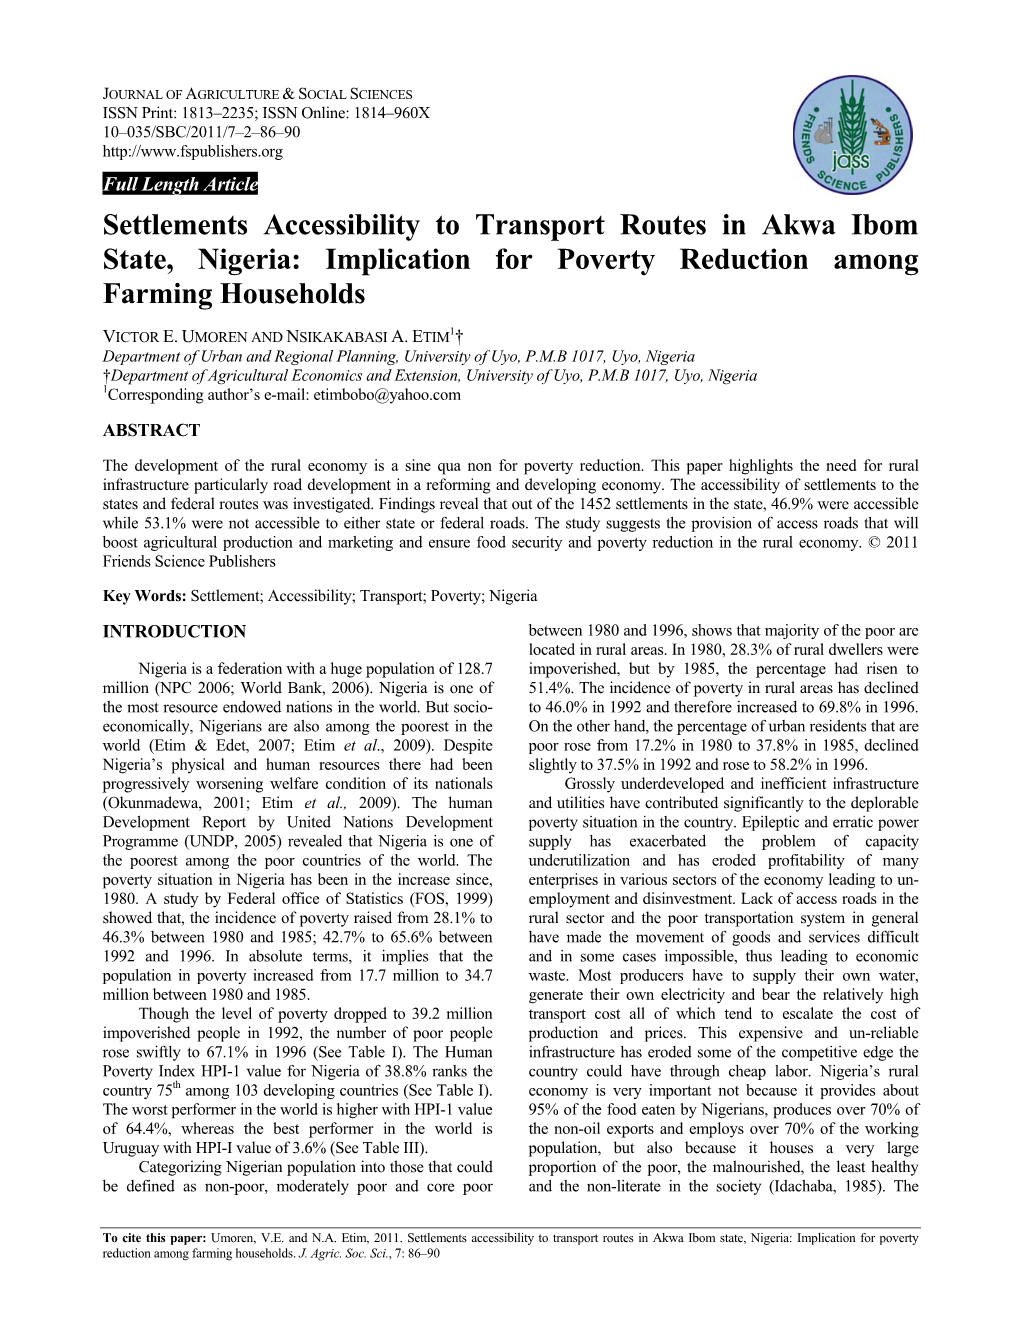 Settlements Accessibility to Transport Routes in Akwa Ibom State, Nigeria: Implication for Poverty Reduction Among Farming Households